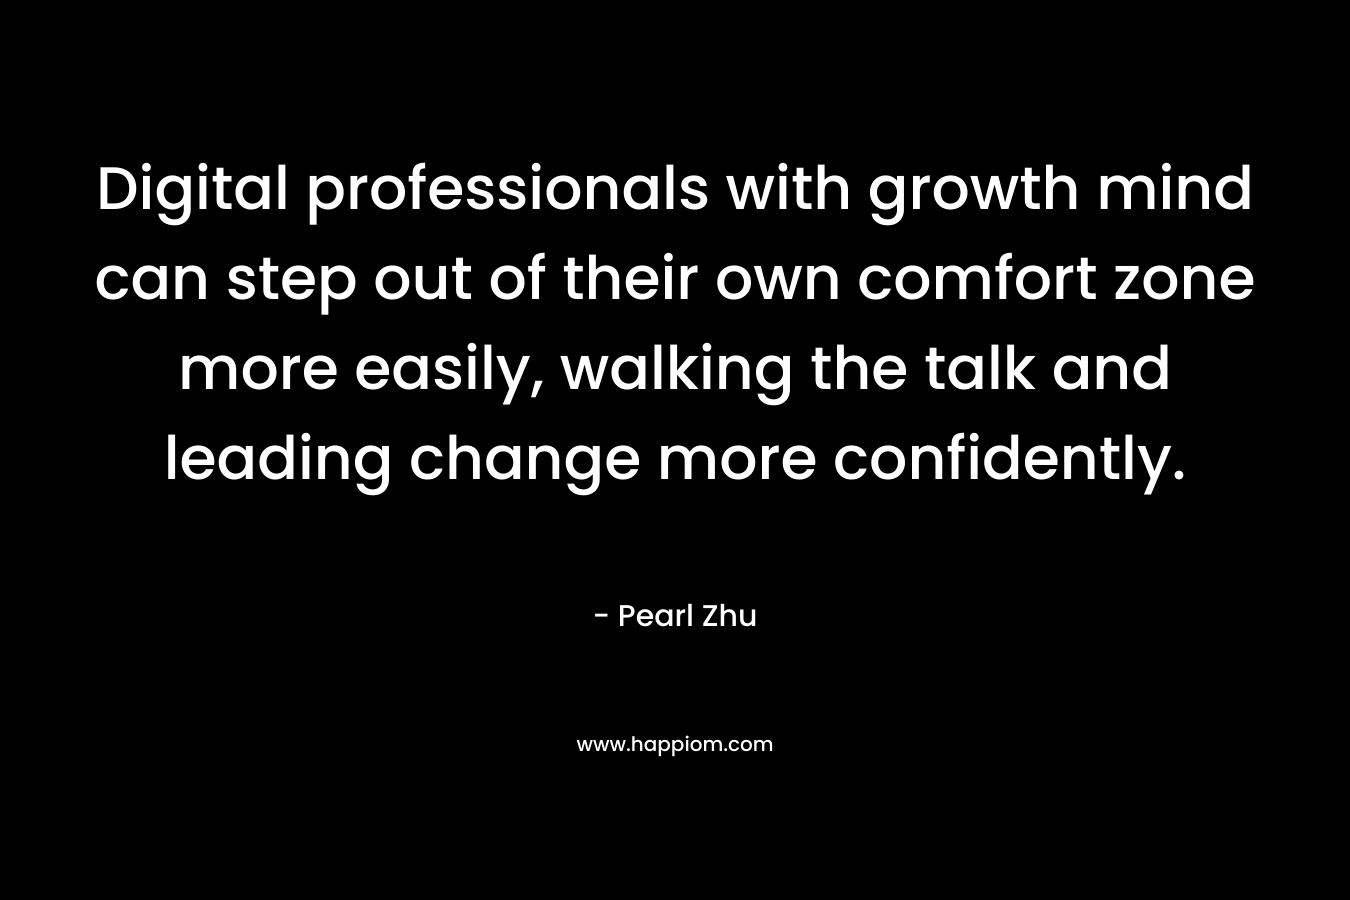 Digital professionals with growth mind can step out of their own comfort zone more easily, walking the talk and leading change more confidently.